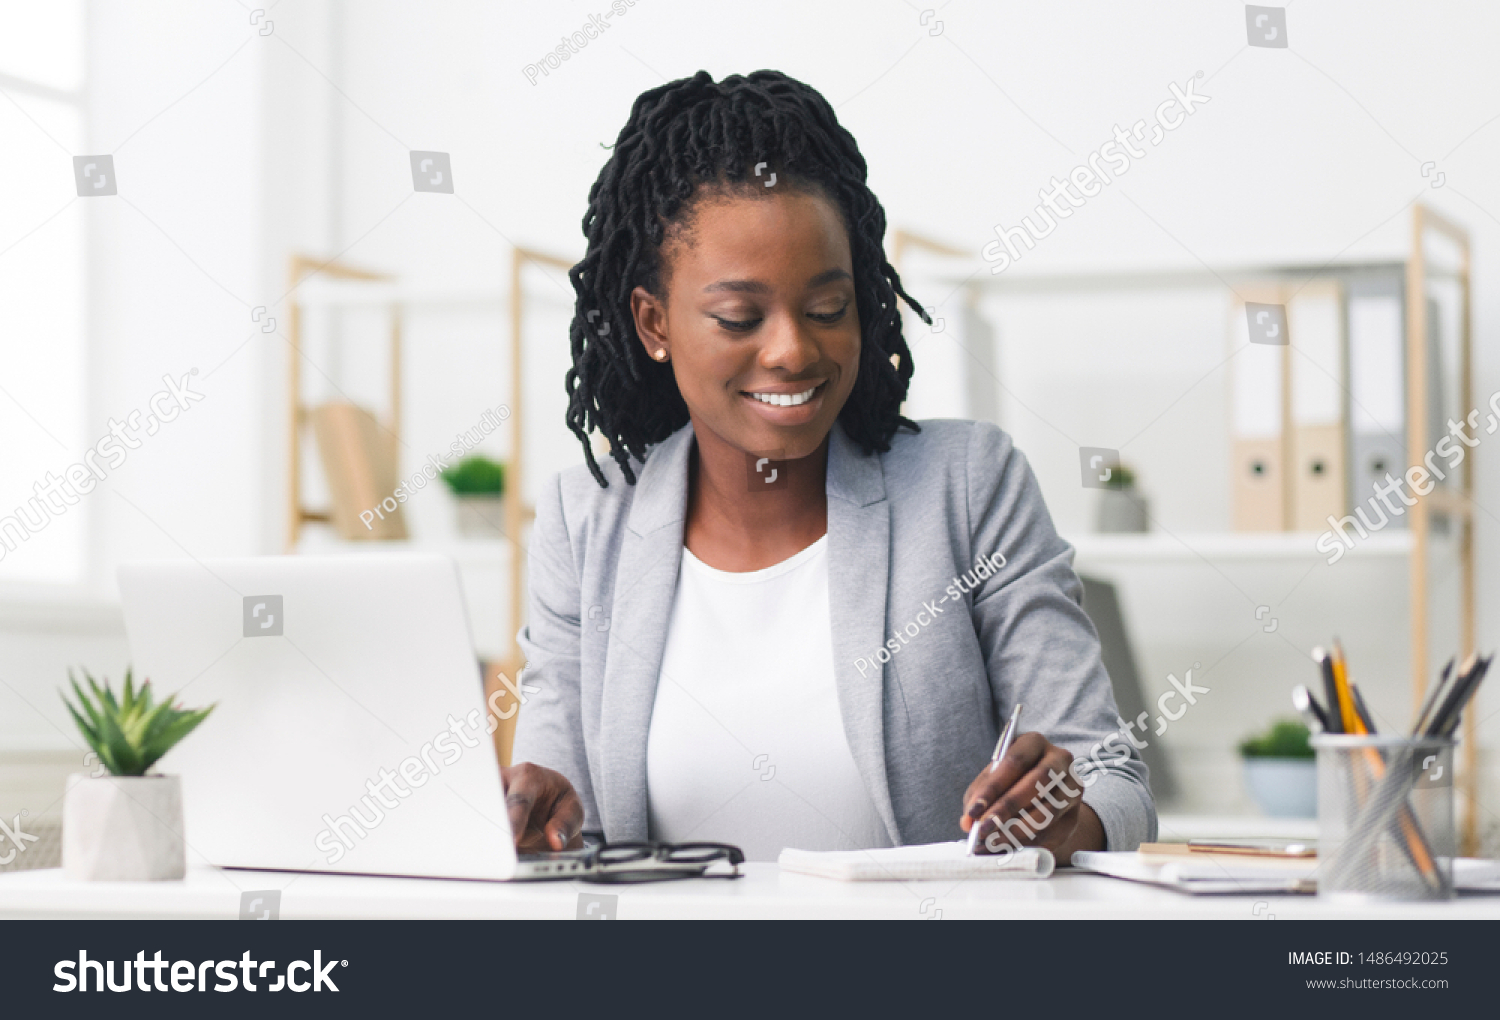 Person Taking Notes Images Stock Photos Vectors Shutterstock